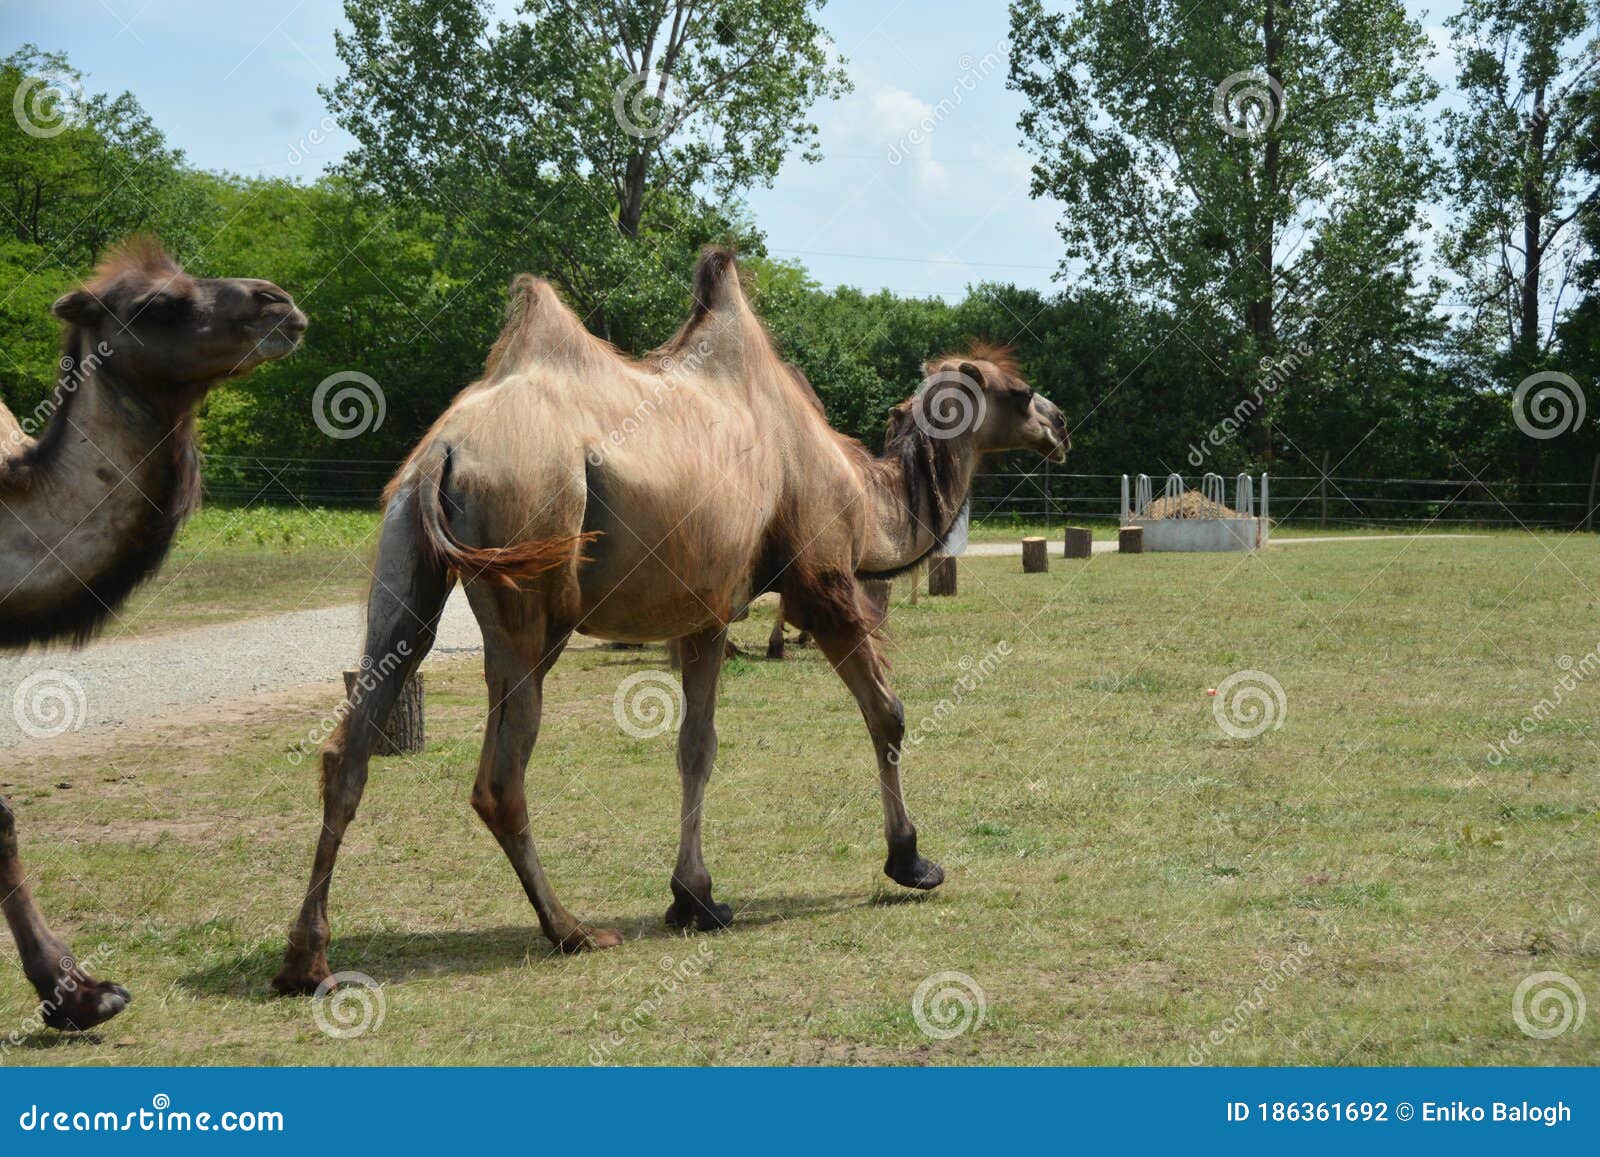 Two Camels in a Safari Park Stock Photo - Image of animal, hungry ...